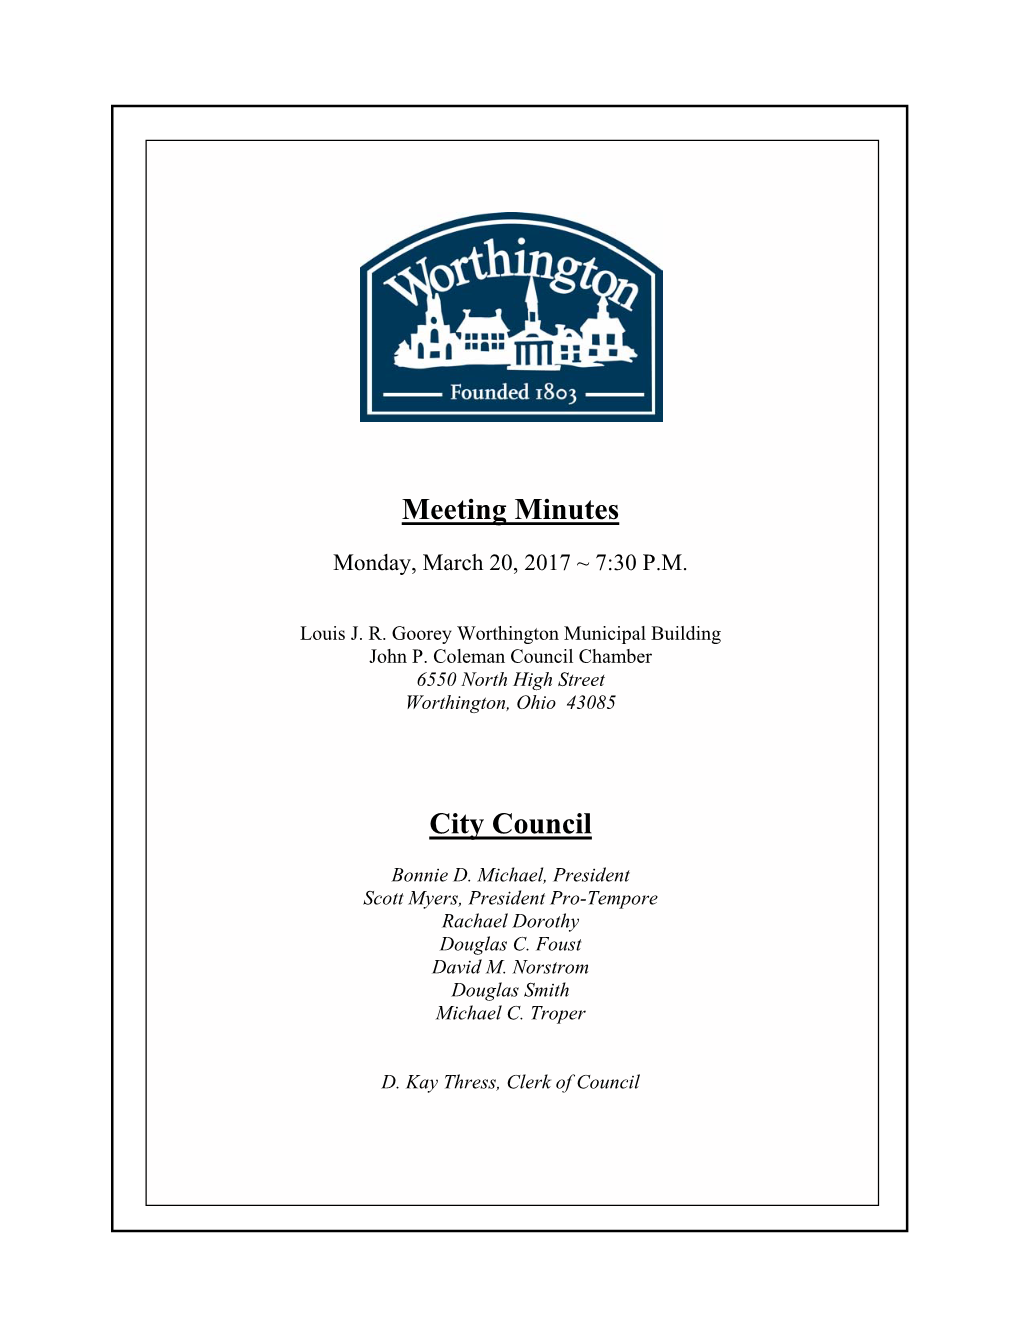 Meeting Minutes City Council